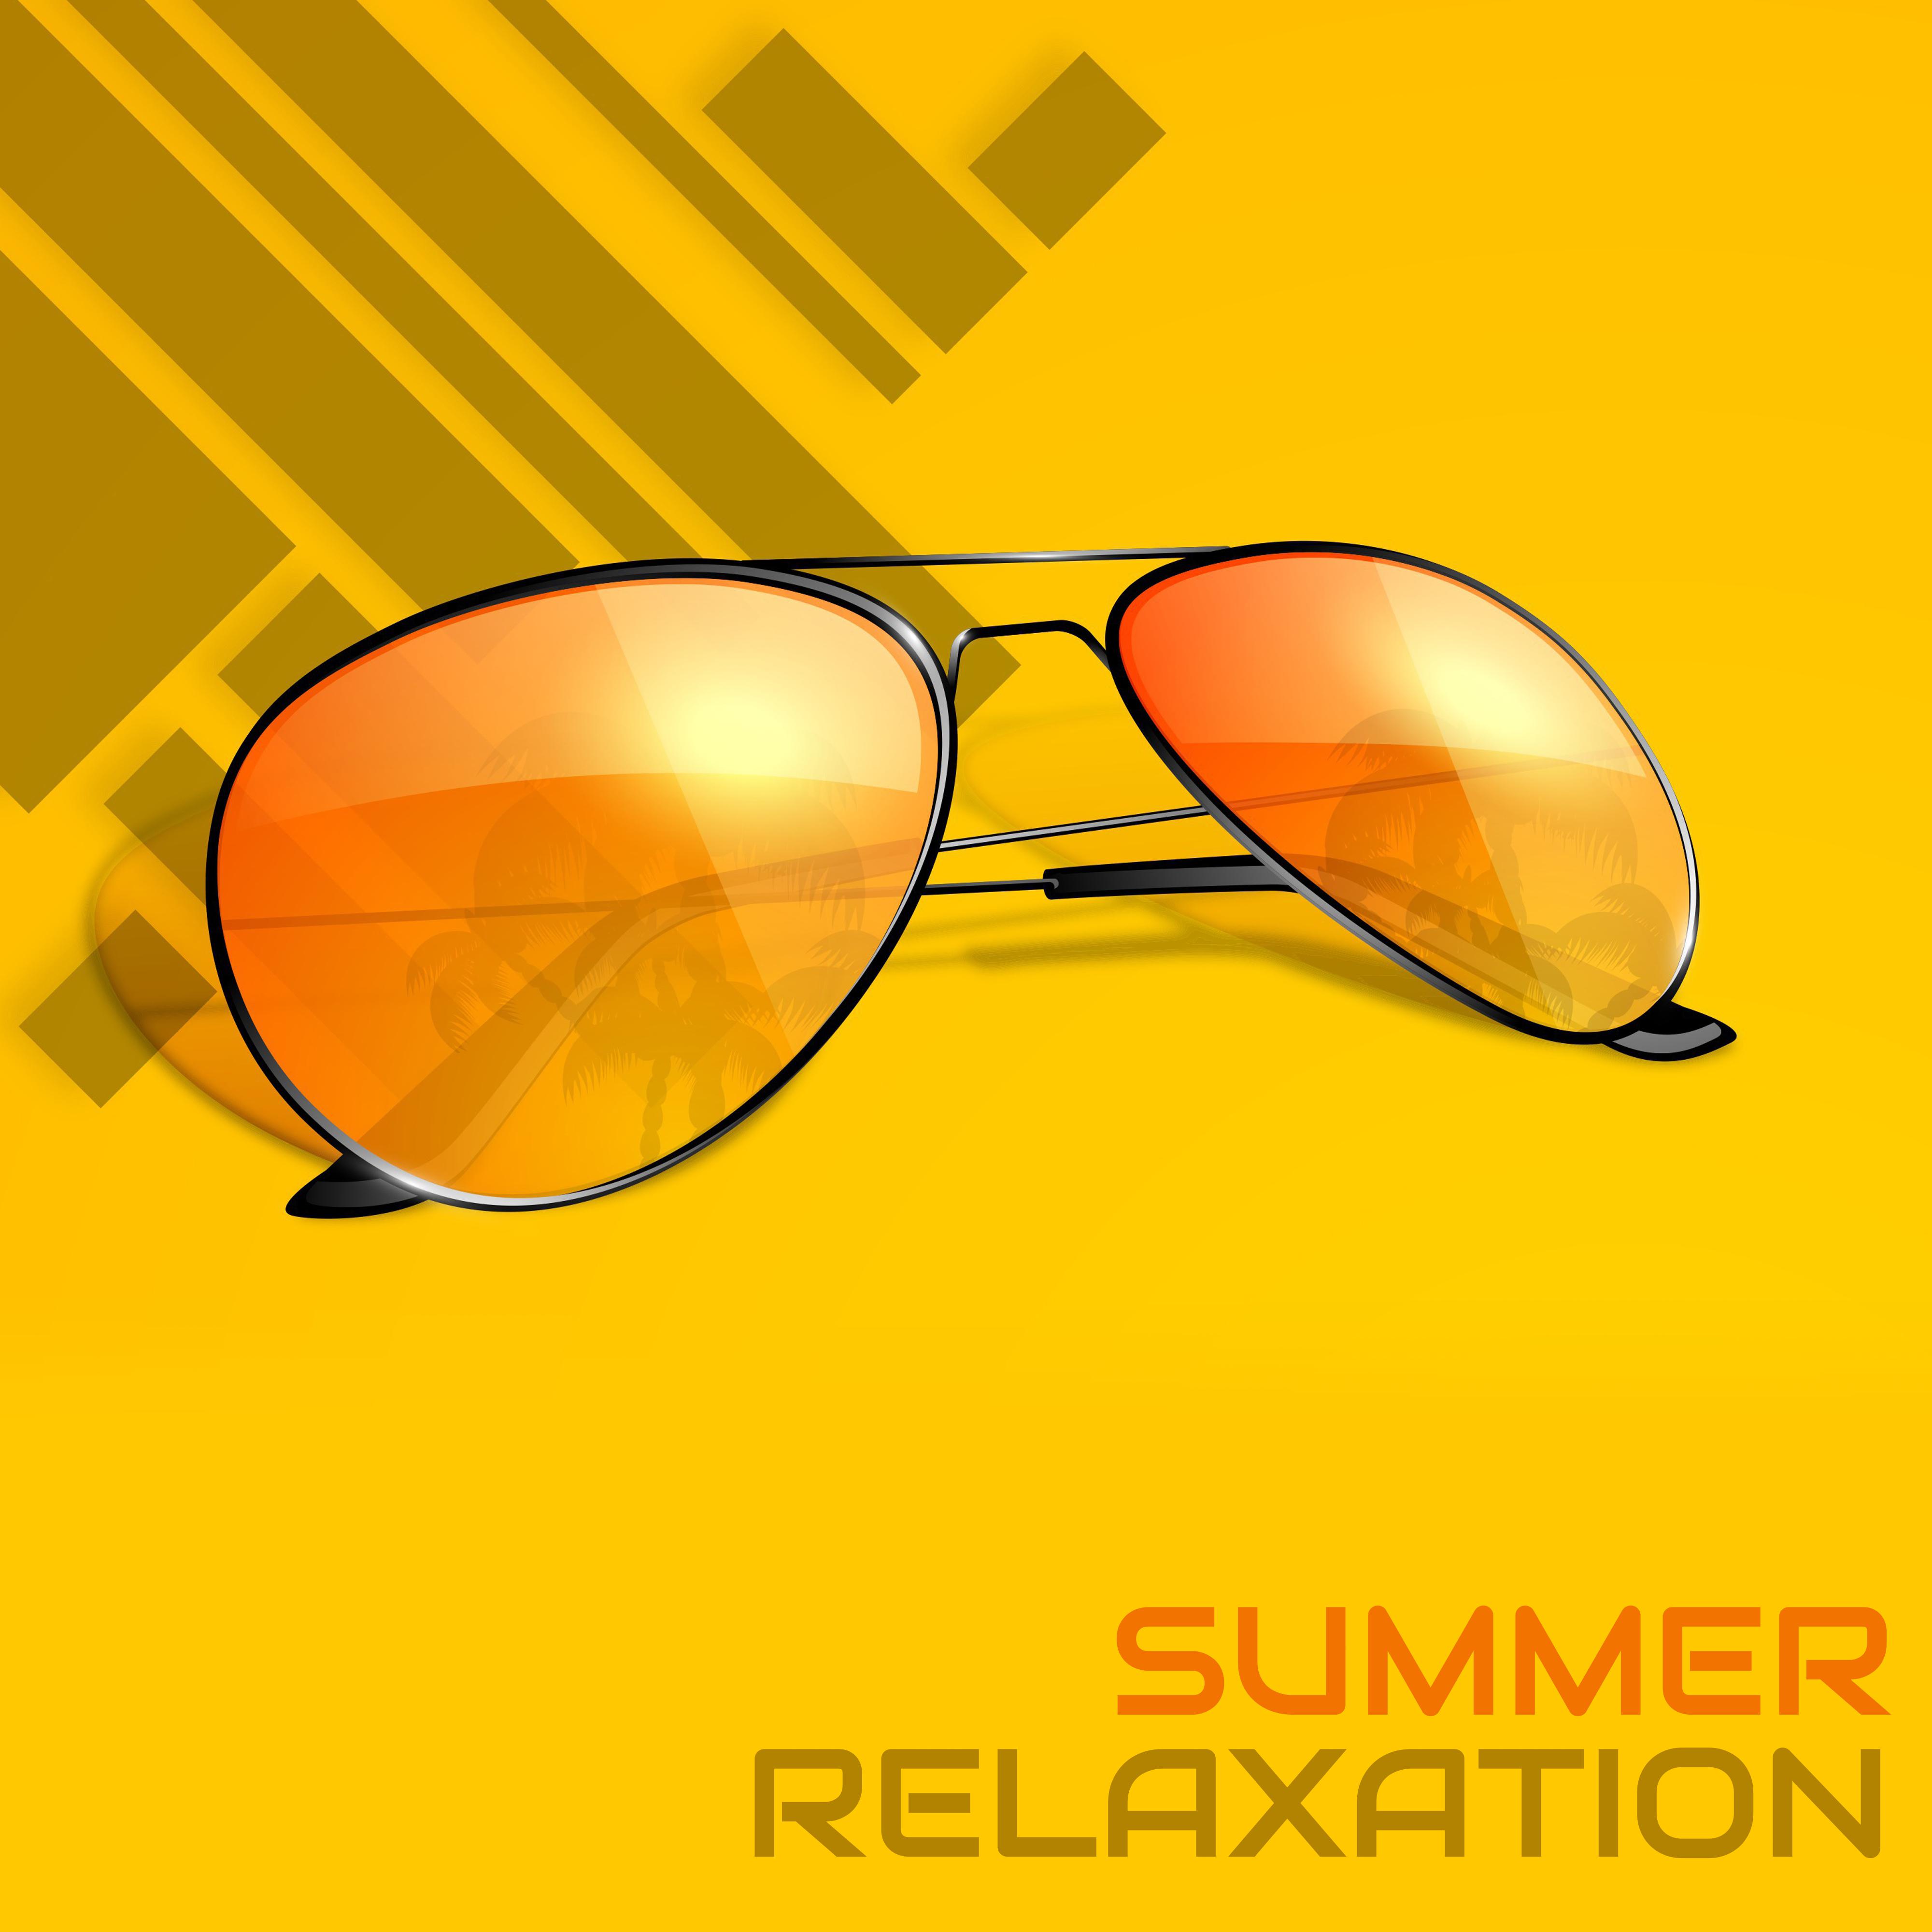 Summer Relaxation: Holiday Music Set for a Time of Complete Rest, Days Off Work and Total Relaxation